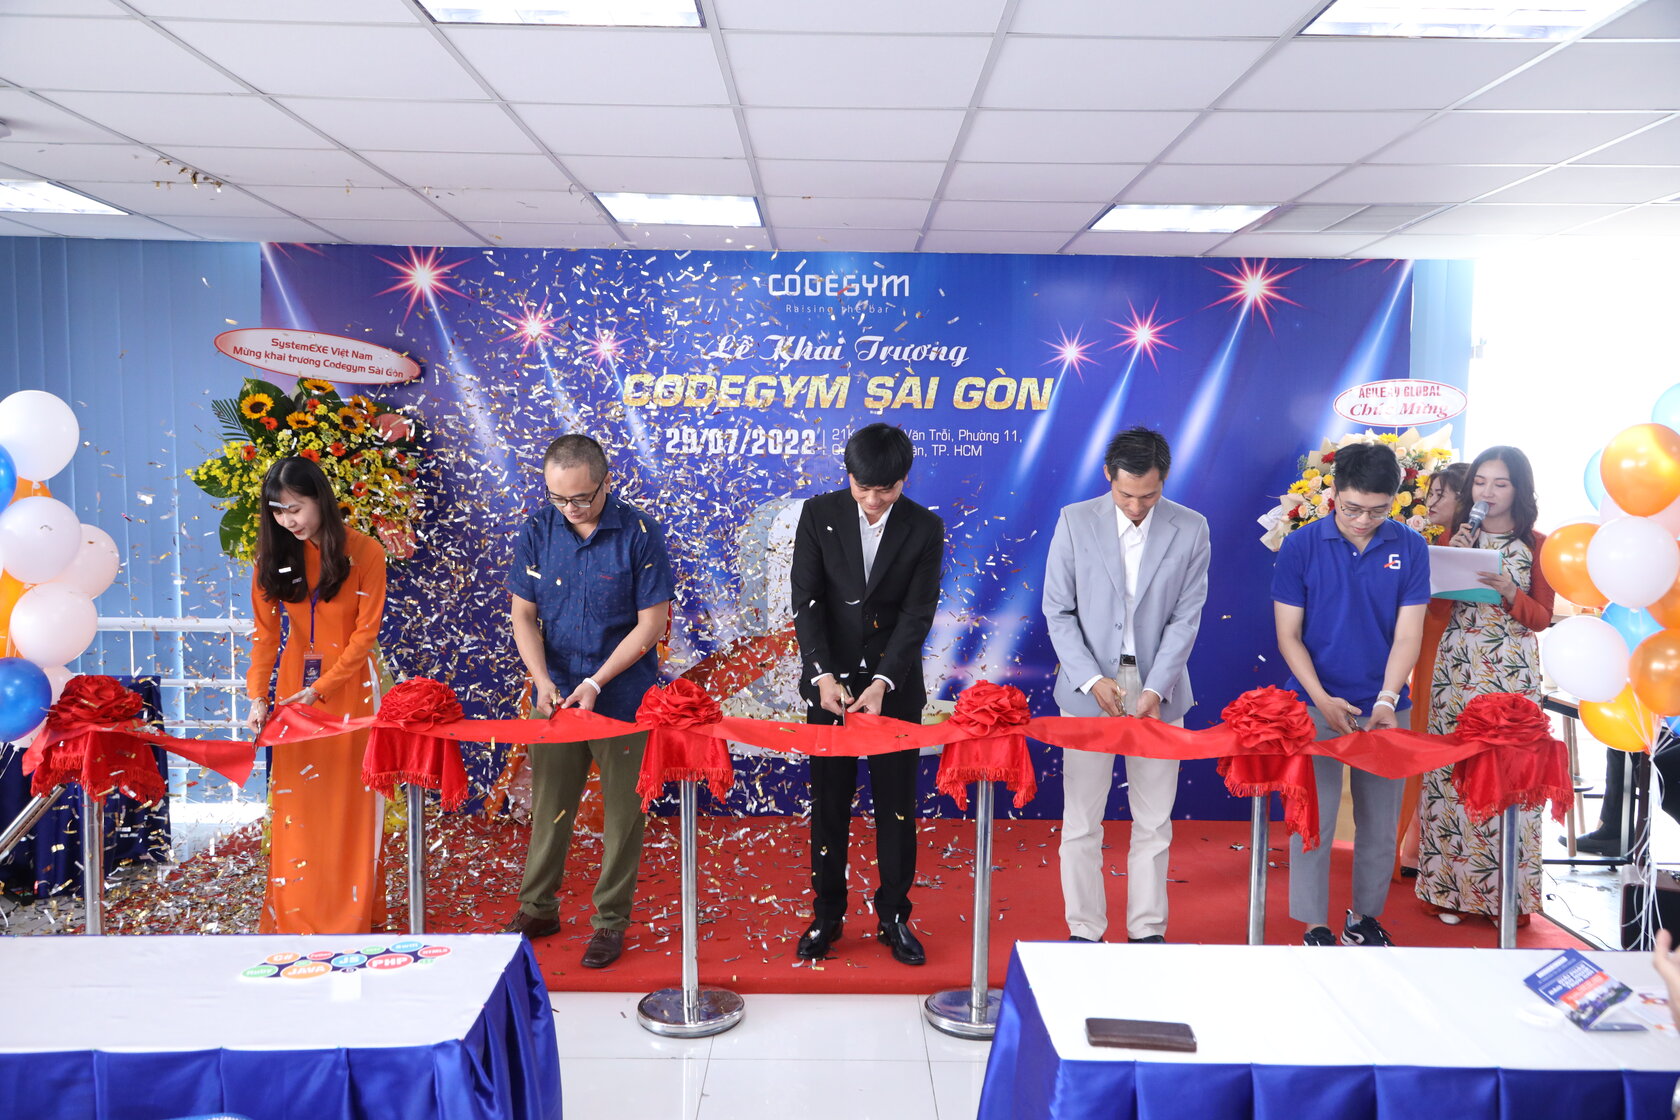 The MOU signing ceremony was also the day that CODEGYM opened its Ho Chi Minh City branch.